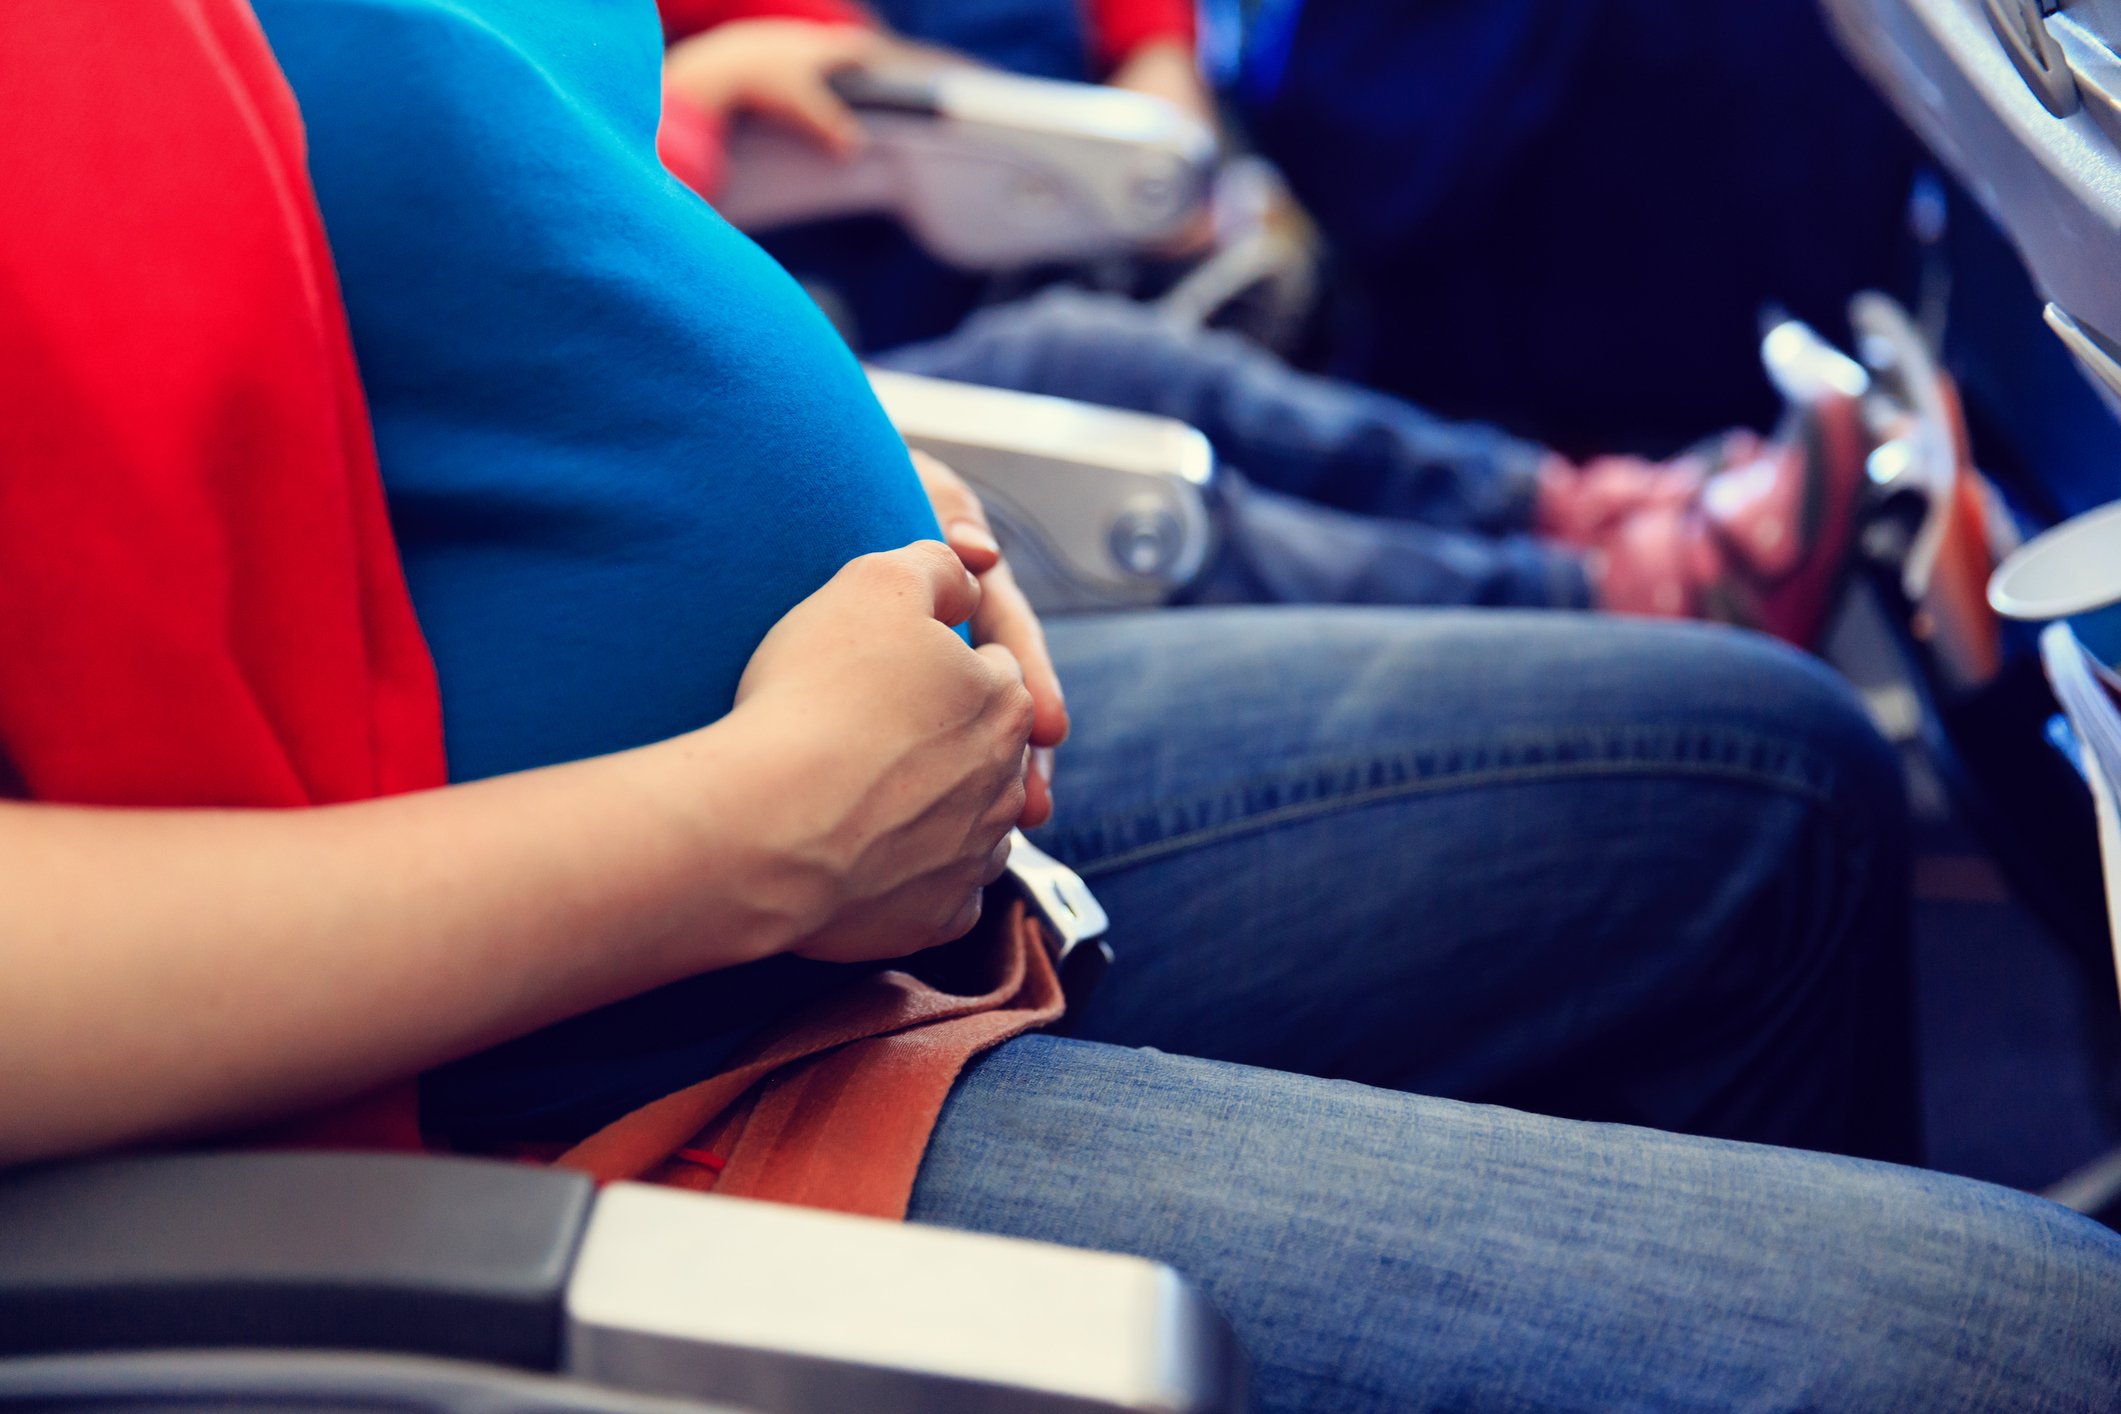 Pregnant woman holding her stomach on a plane